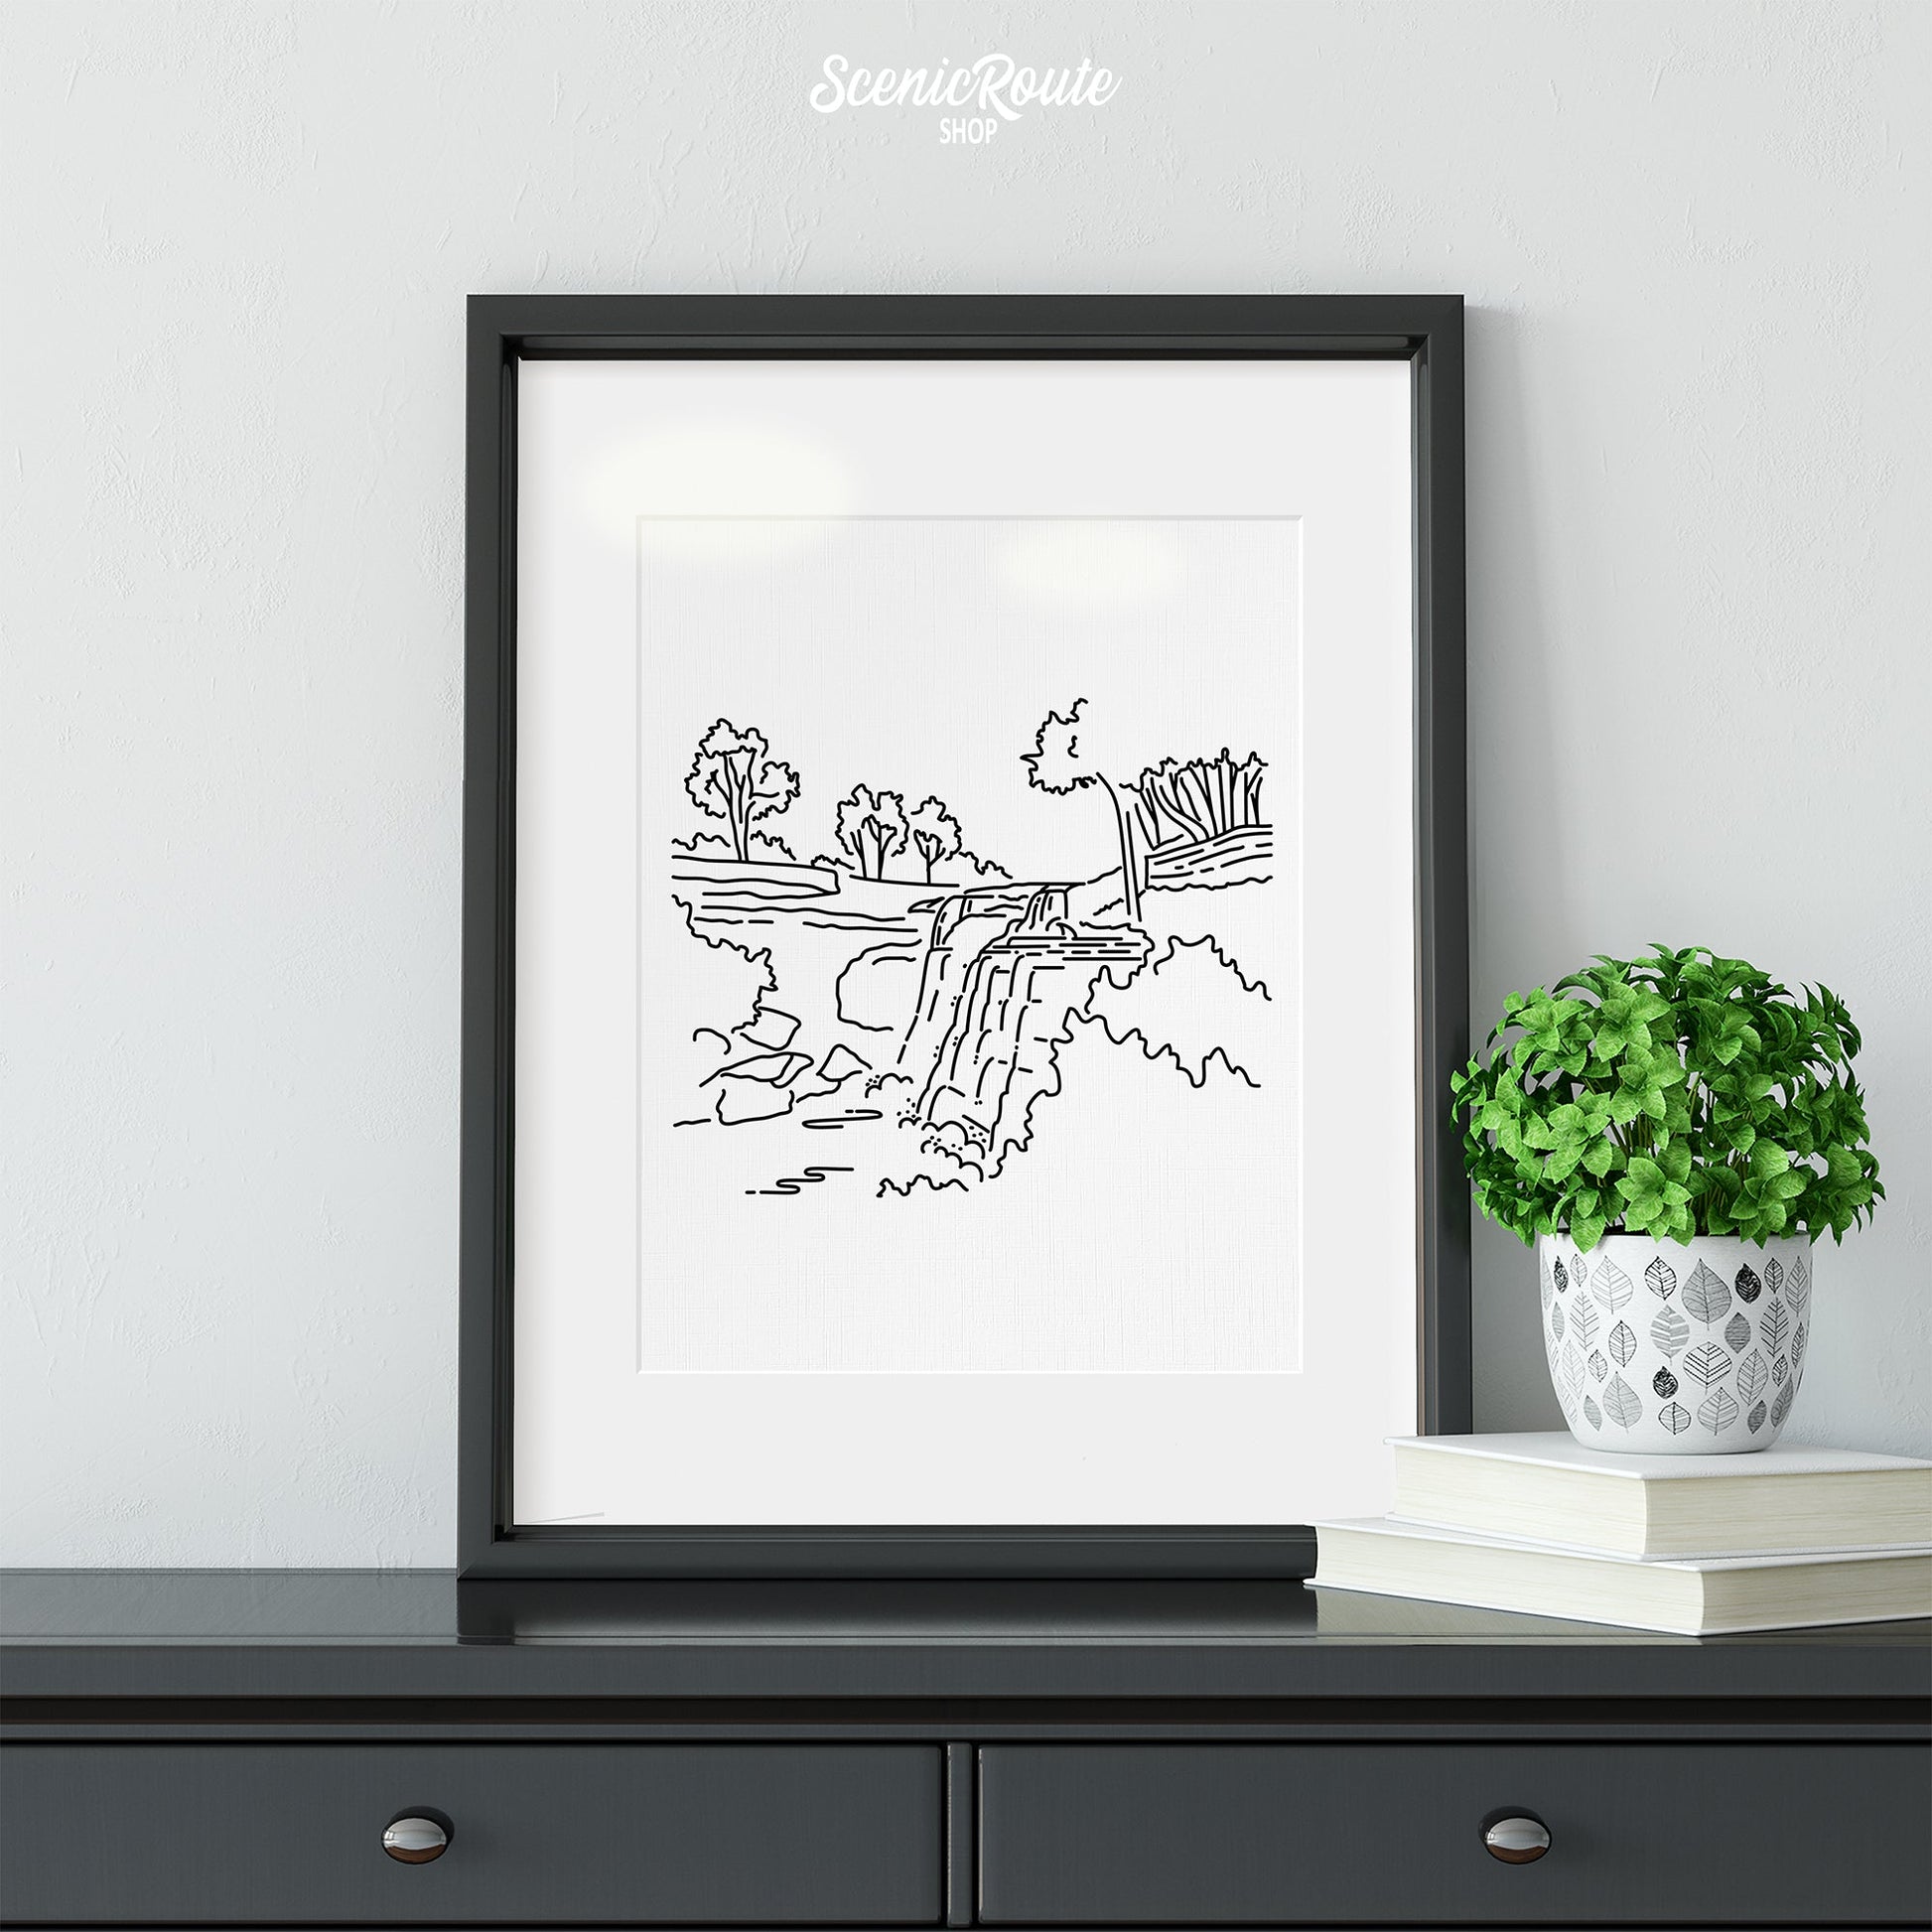 A framed line art drawing of Cuyahoga Valley National Park with a potted plant